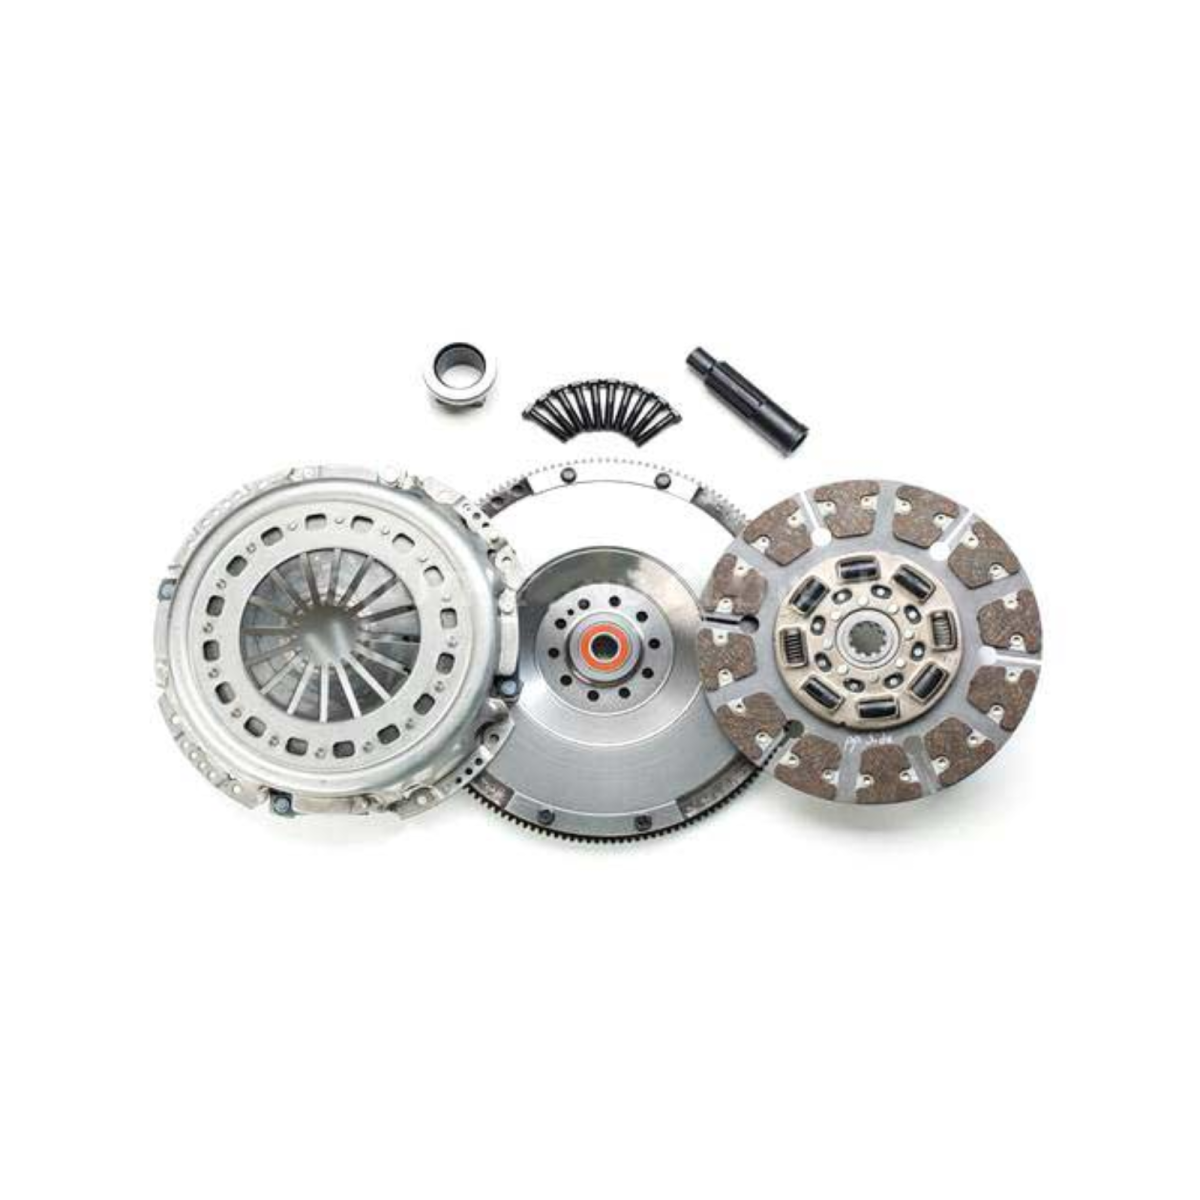 South Bend Clutch - South Bend Performance Upgrade Clutch For 2008-2010 Ford 6.4 Powerstroke Diesel